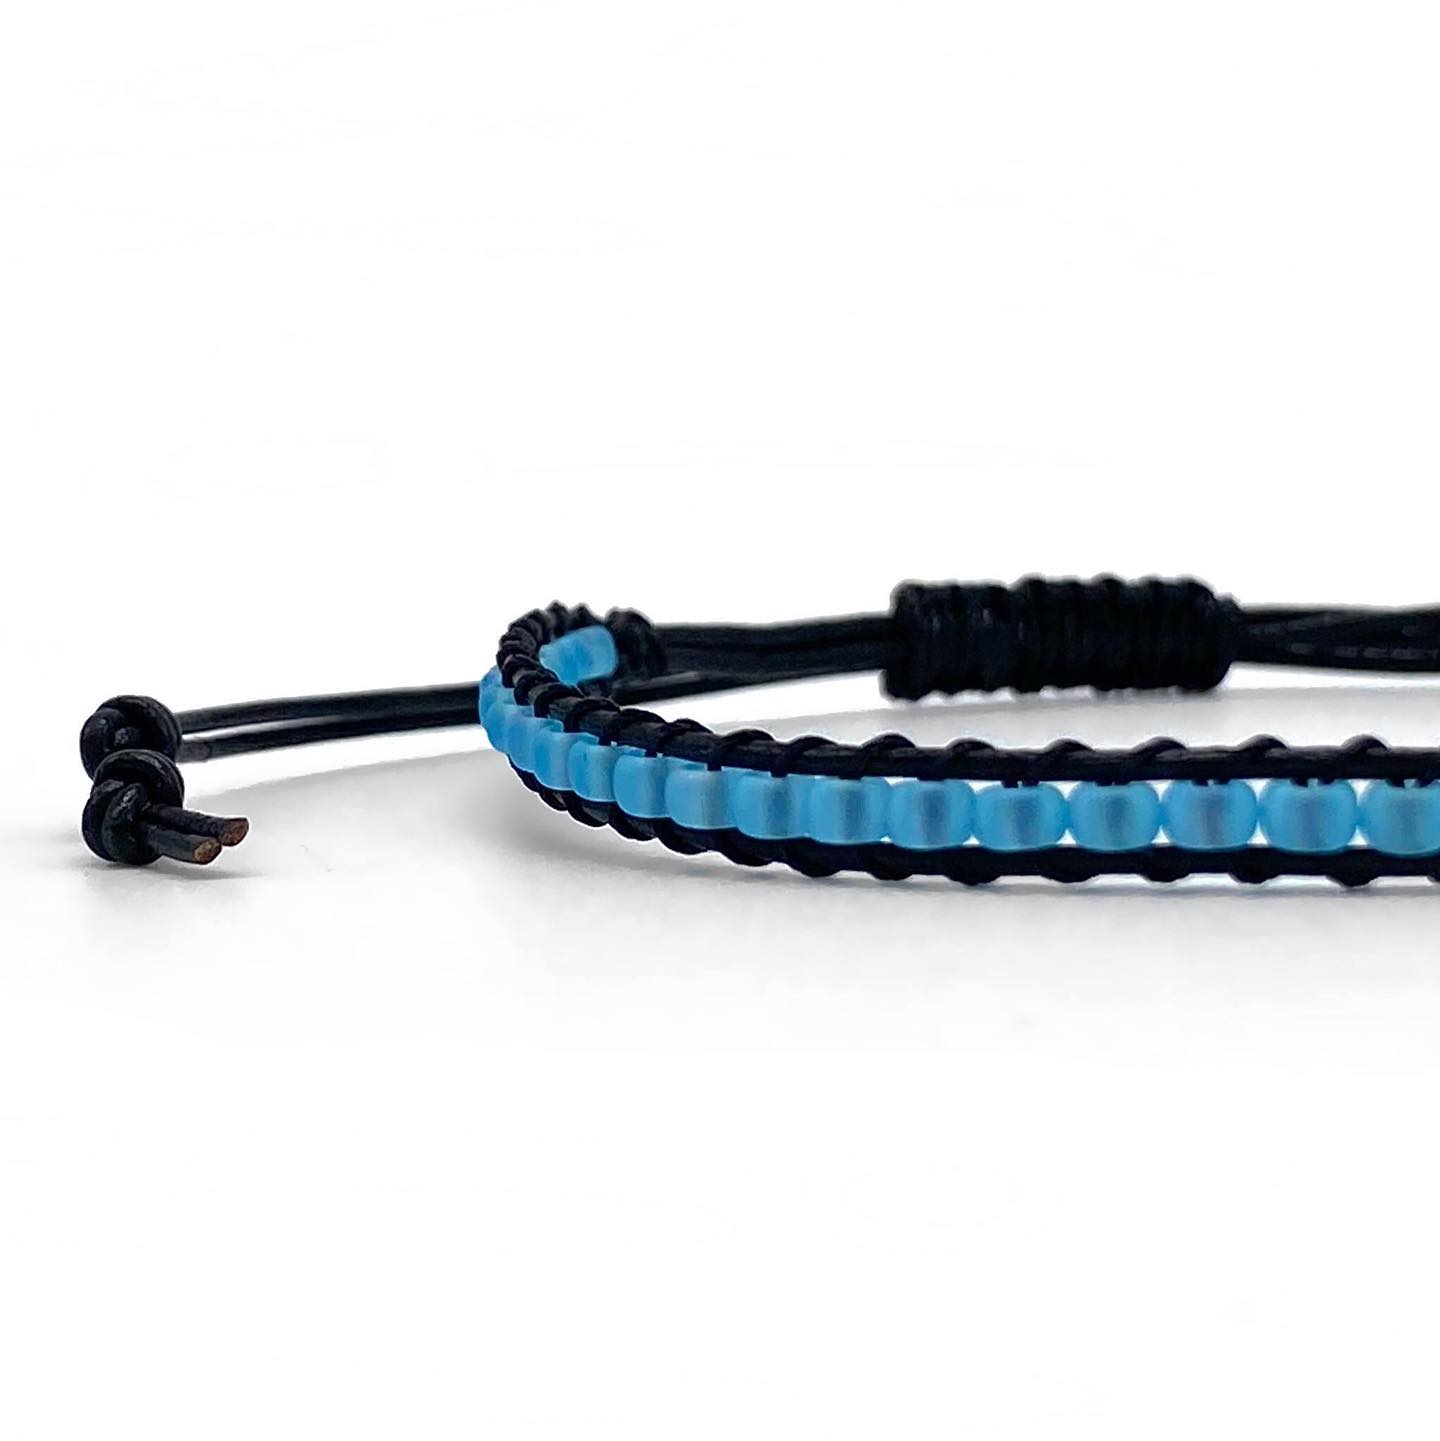 Handmade bracelet with adjustable length by Zosimi Beads, made with leather and glass beads combining black with aqua blue in a beautiful colour combination that is both masculine and diverse. Check it out:
____
menandunderwear.com/shop